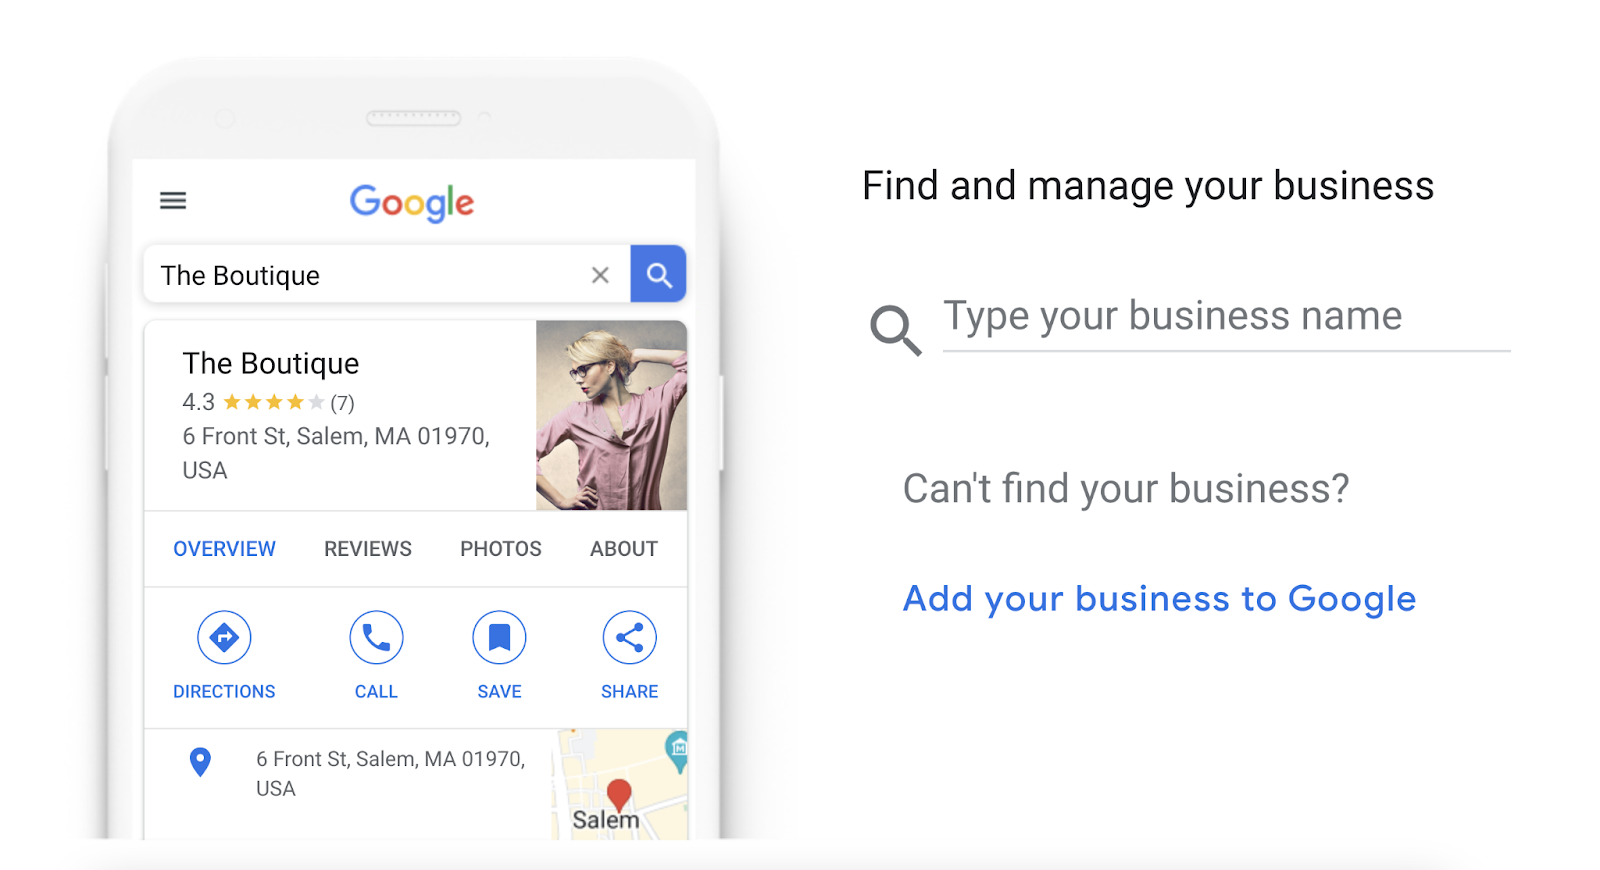 Signing in to Google Business Profile